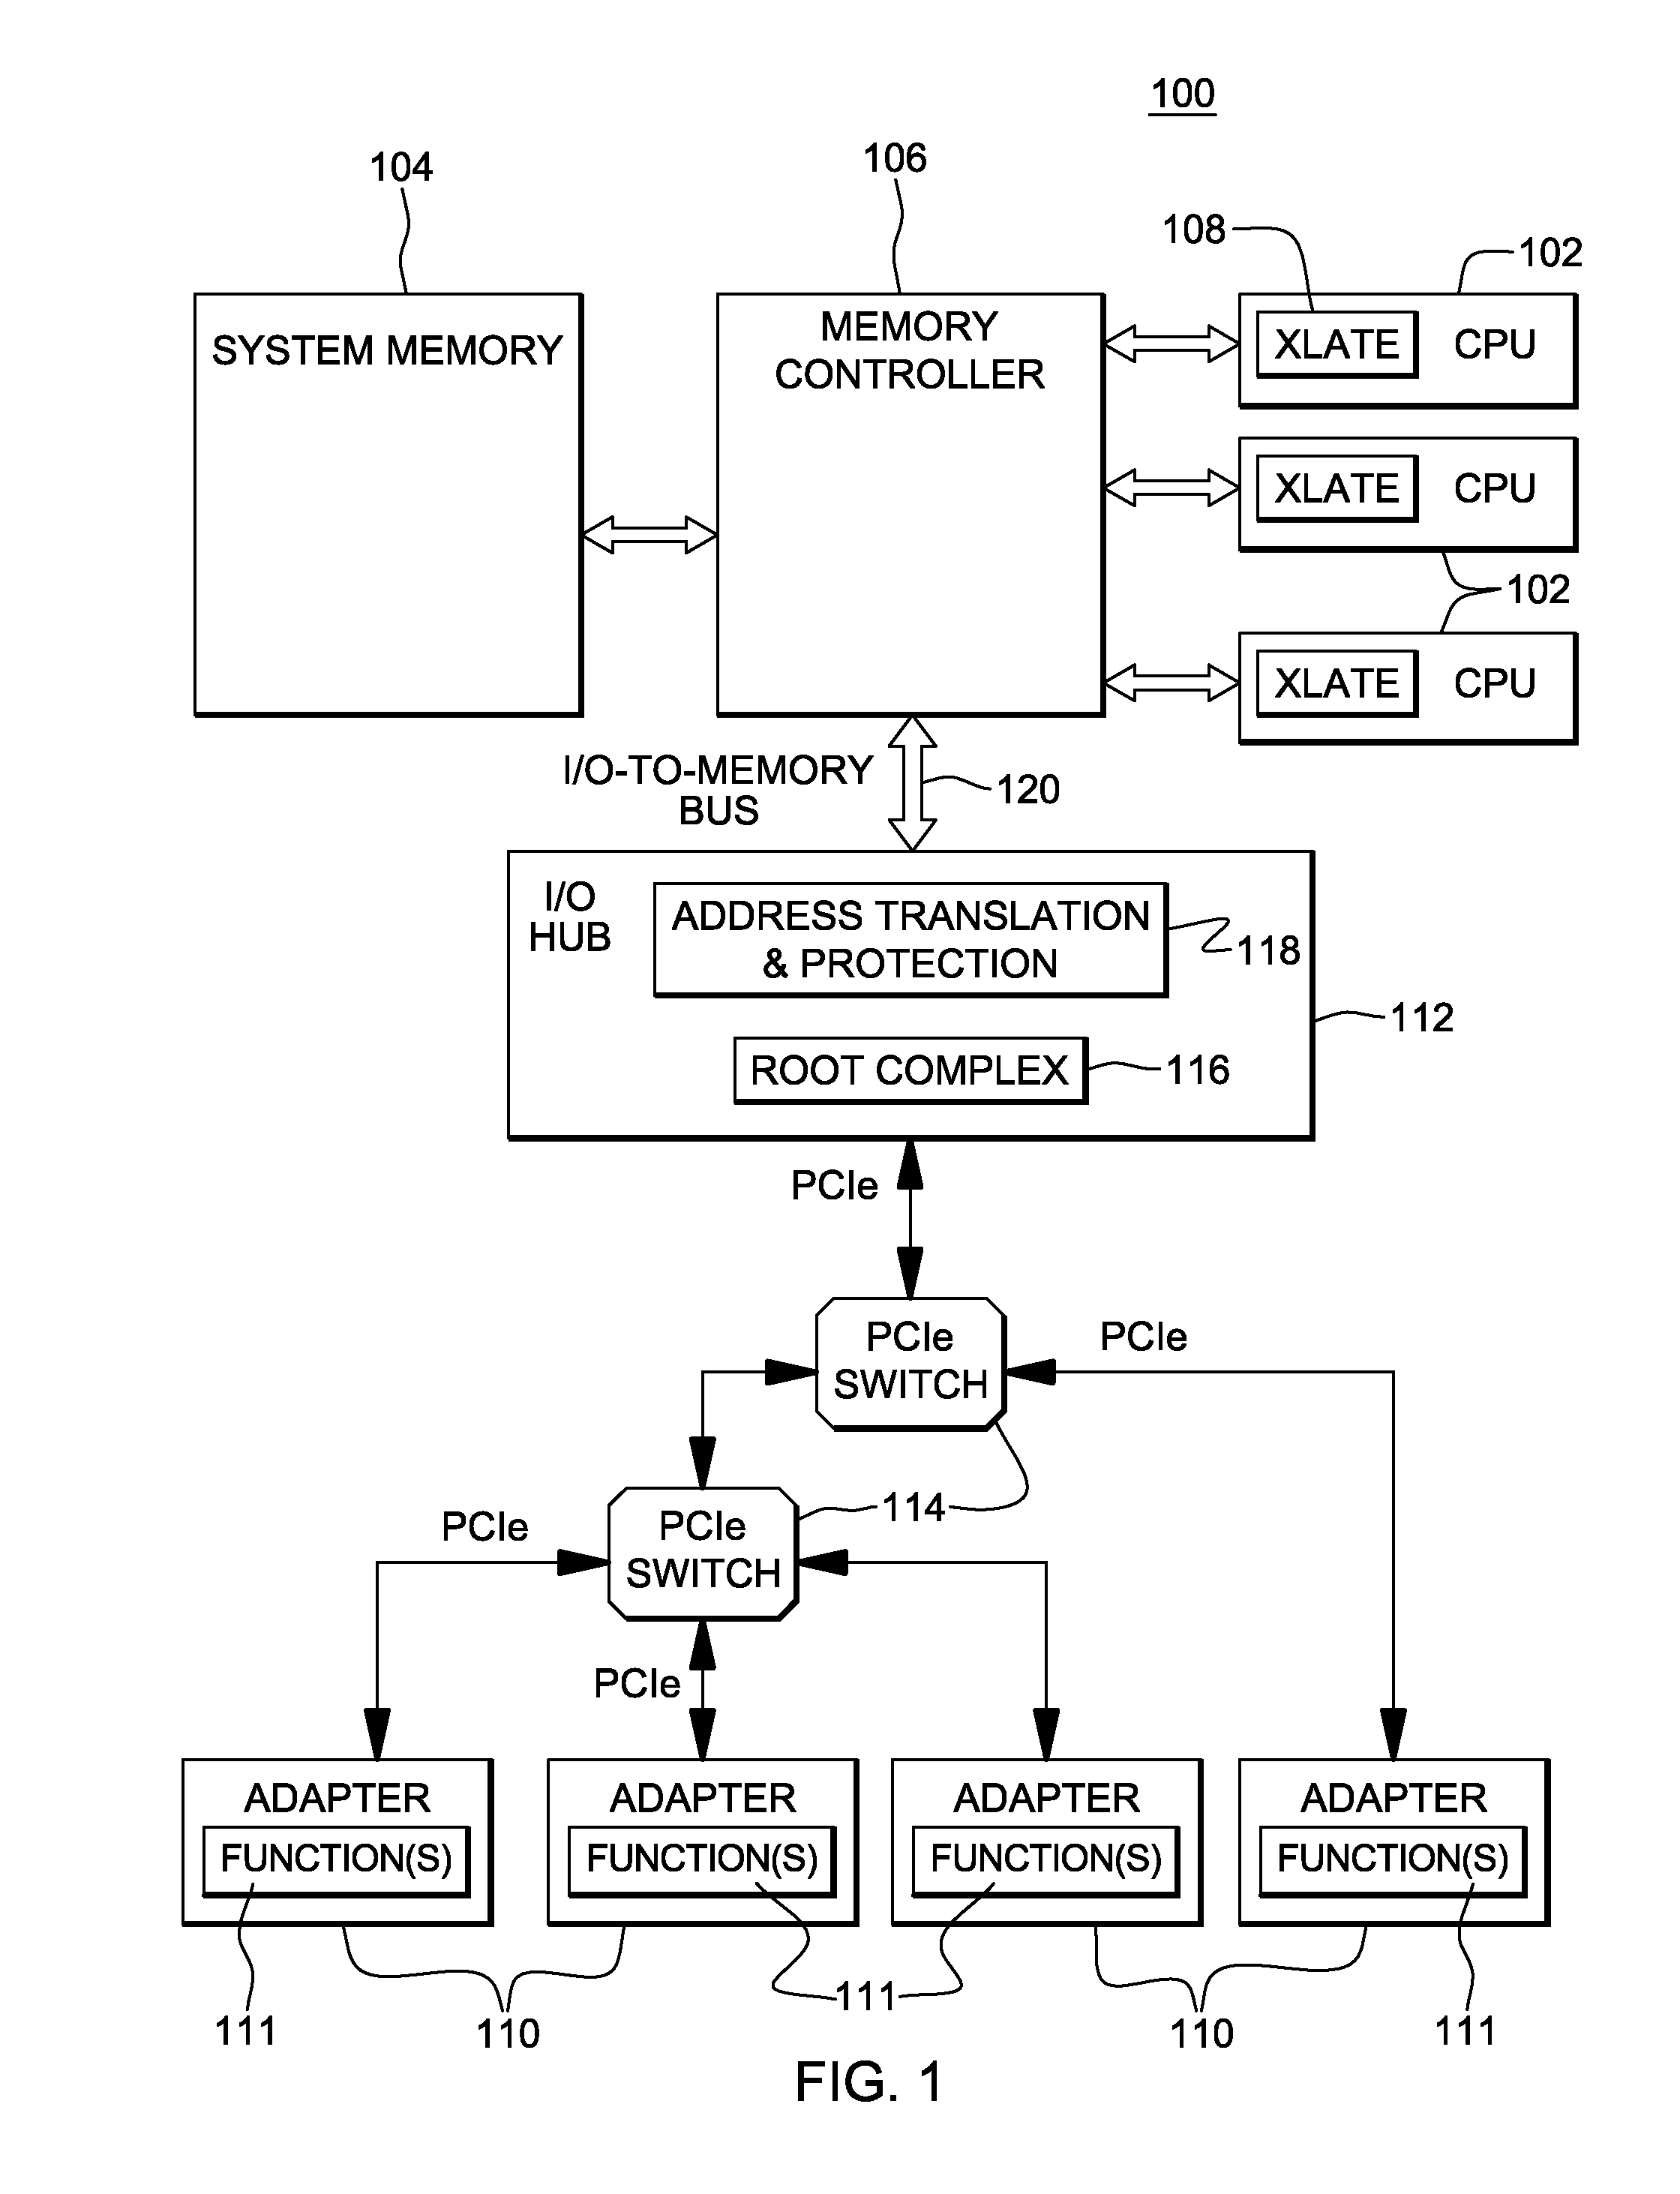 Measurement facility for adapter functions